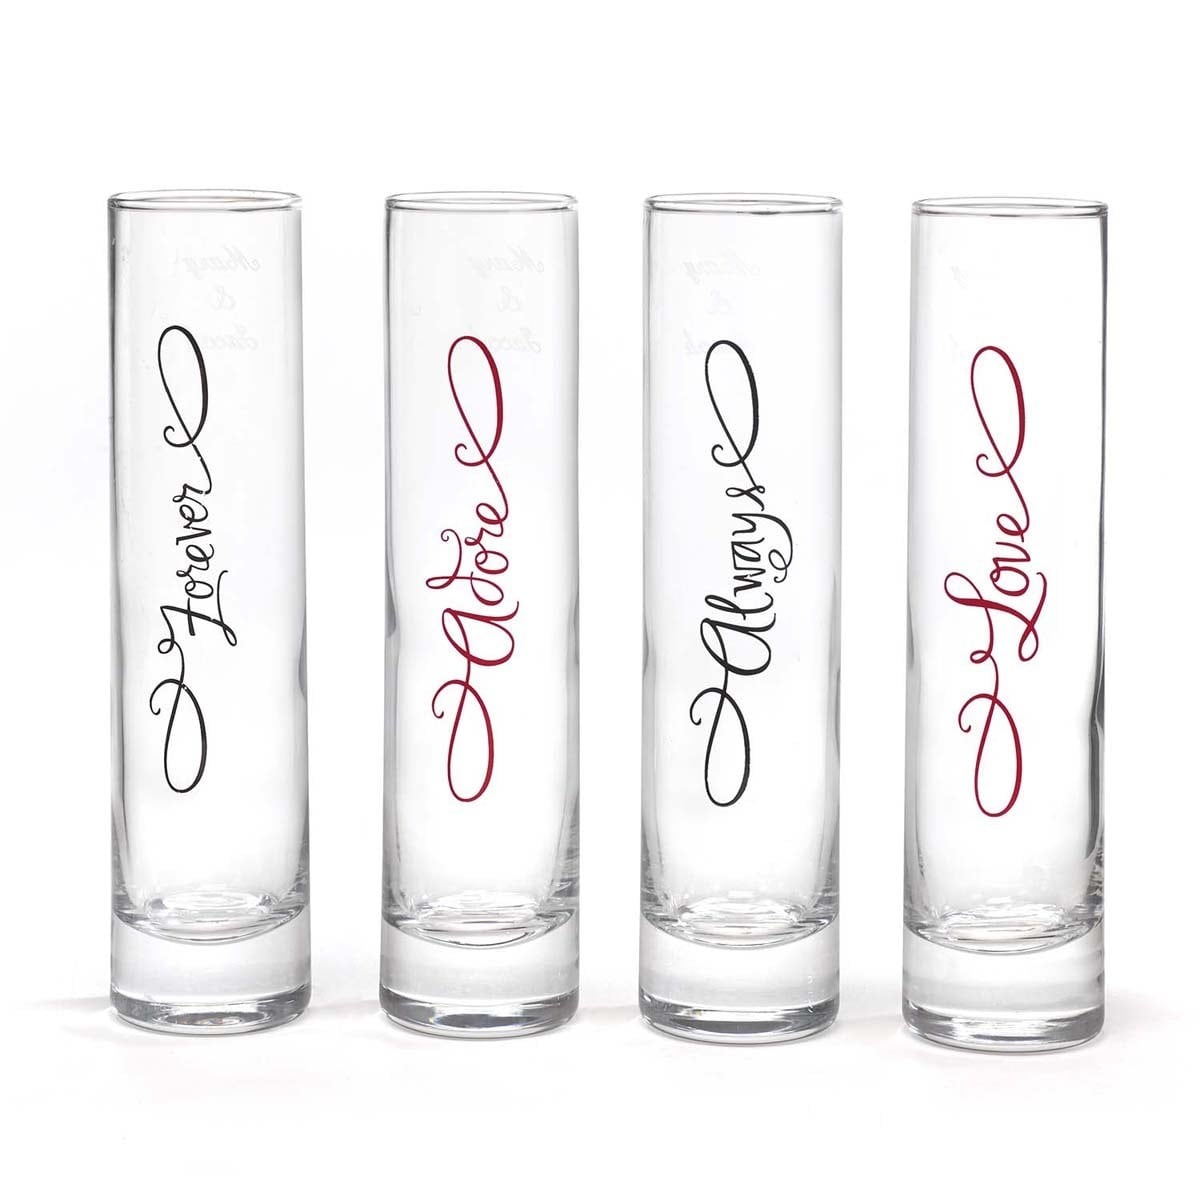 Lovely Word Glass Cylinder (set Of 4) (Clear/ black/ redSet includes Four (4) glassesText Forever, Adore, Always, LoveDimensions 7.5 inches x 1.75 inches x 1.75 inches )